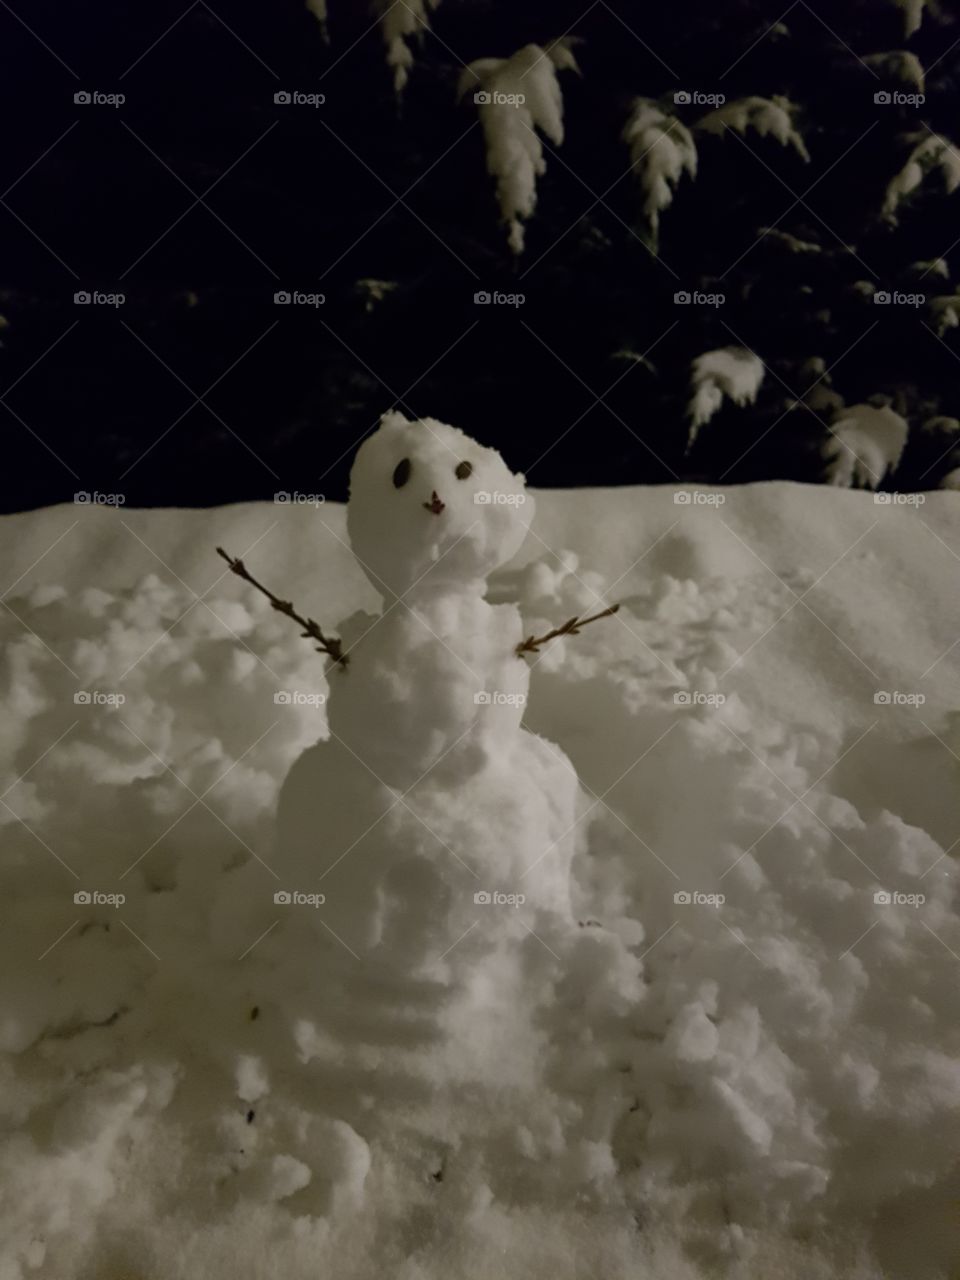 Little snowman on a table during a snowy night.